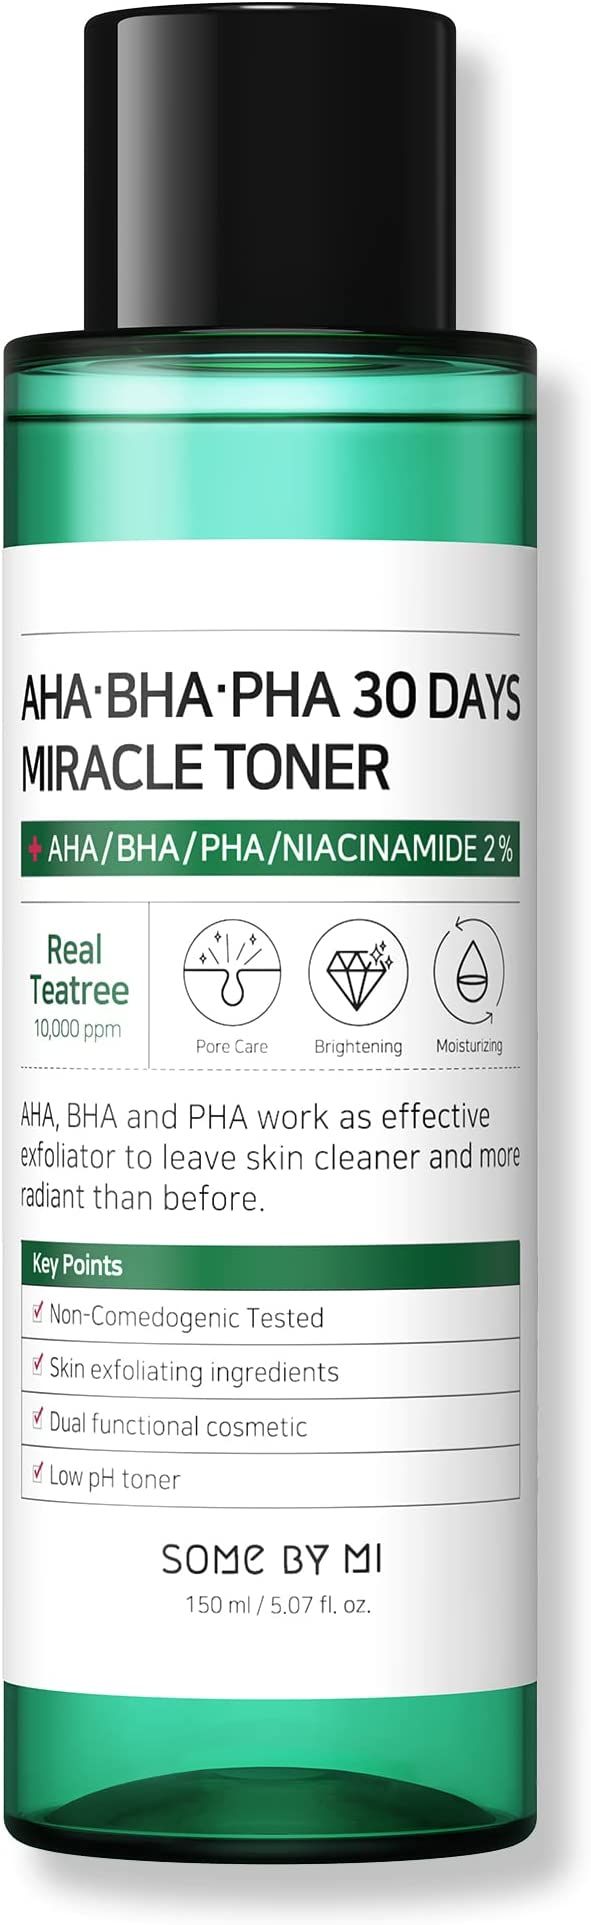 SOME BY MI AHA BHA PHA 30 Days Miracle Toner / 5.07Oz, 150ml / Made from Tea Tree Leaf Water for ... | Amazon (US)